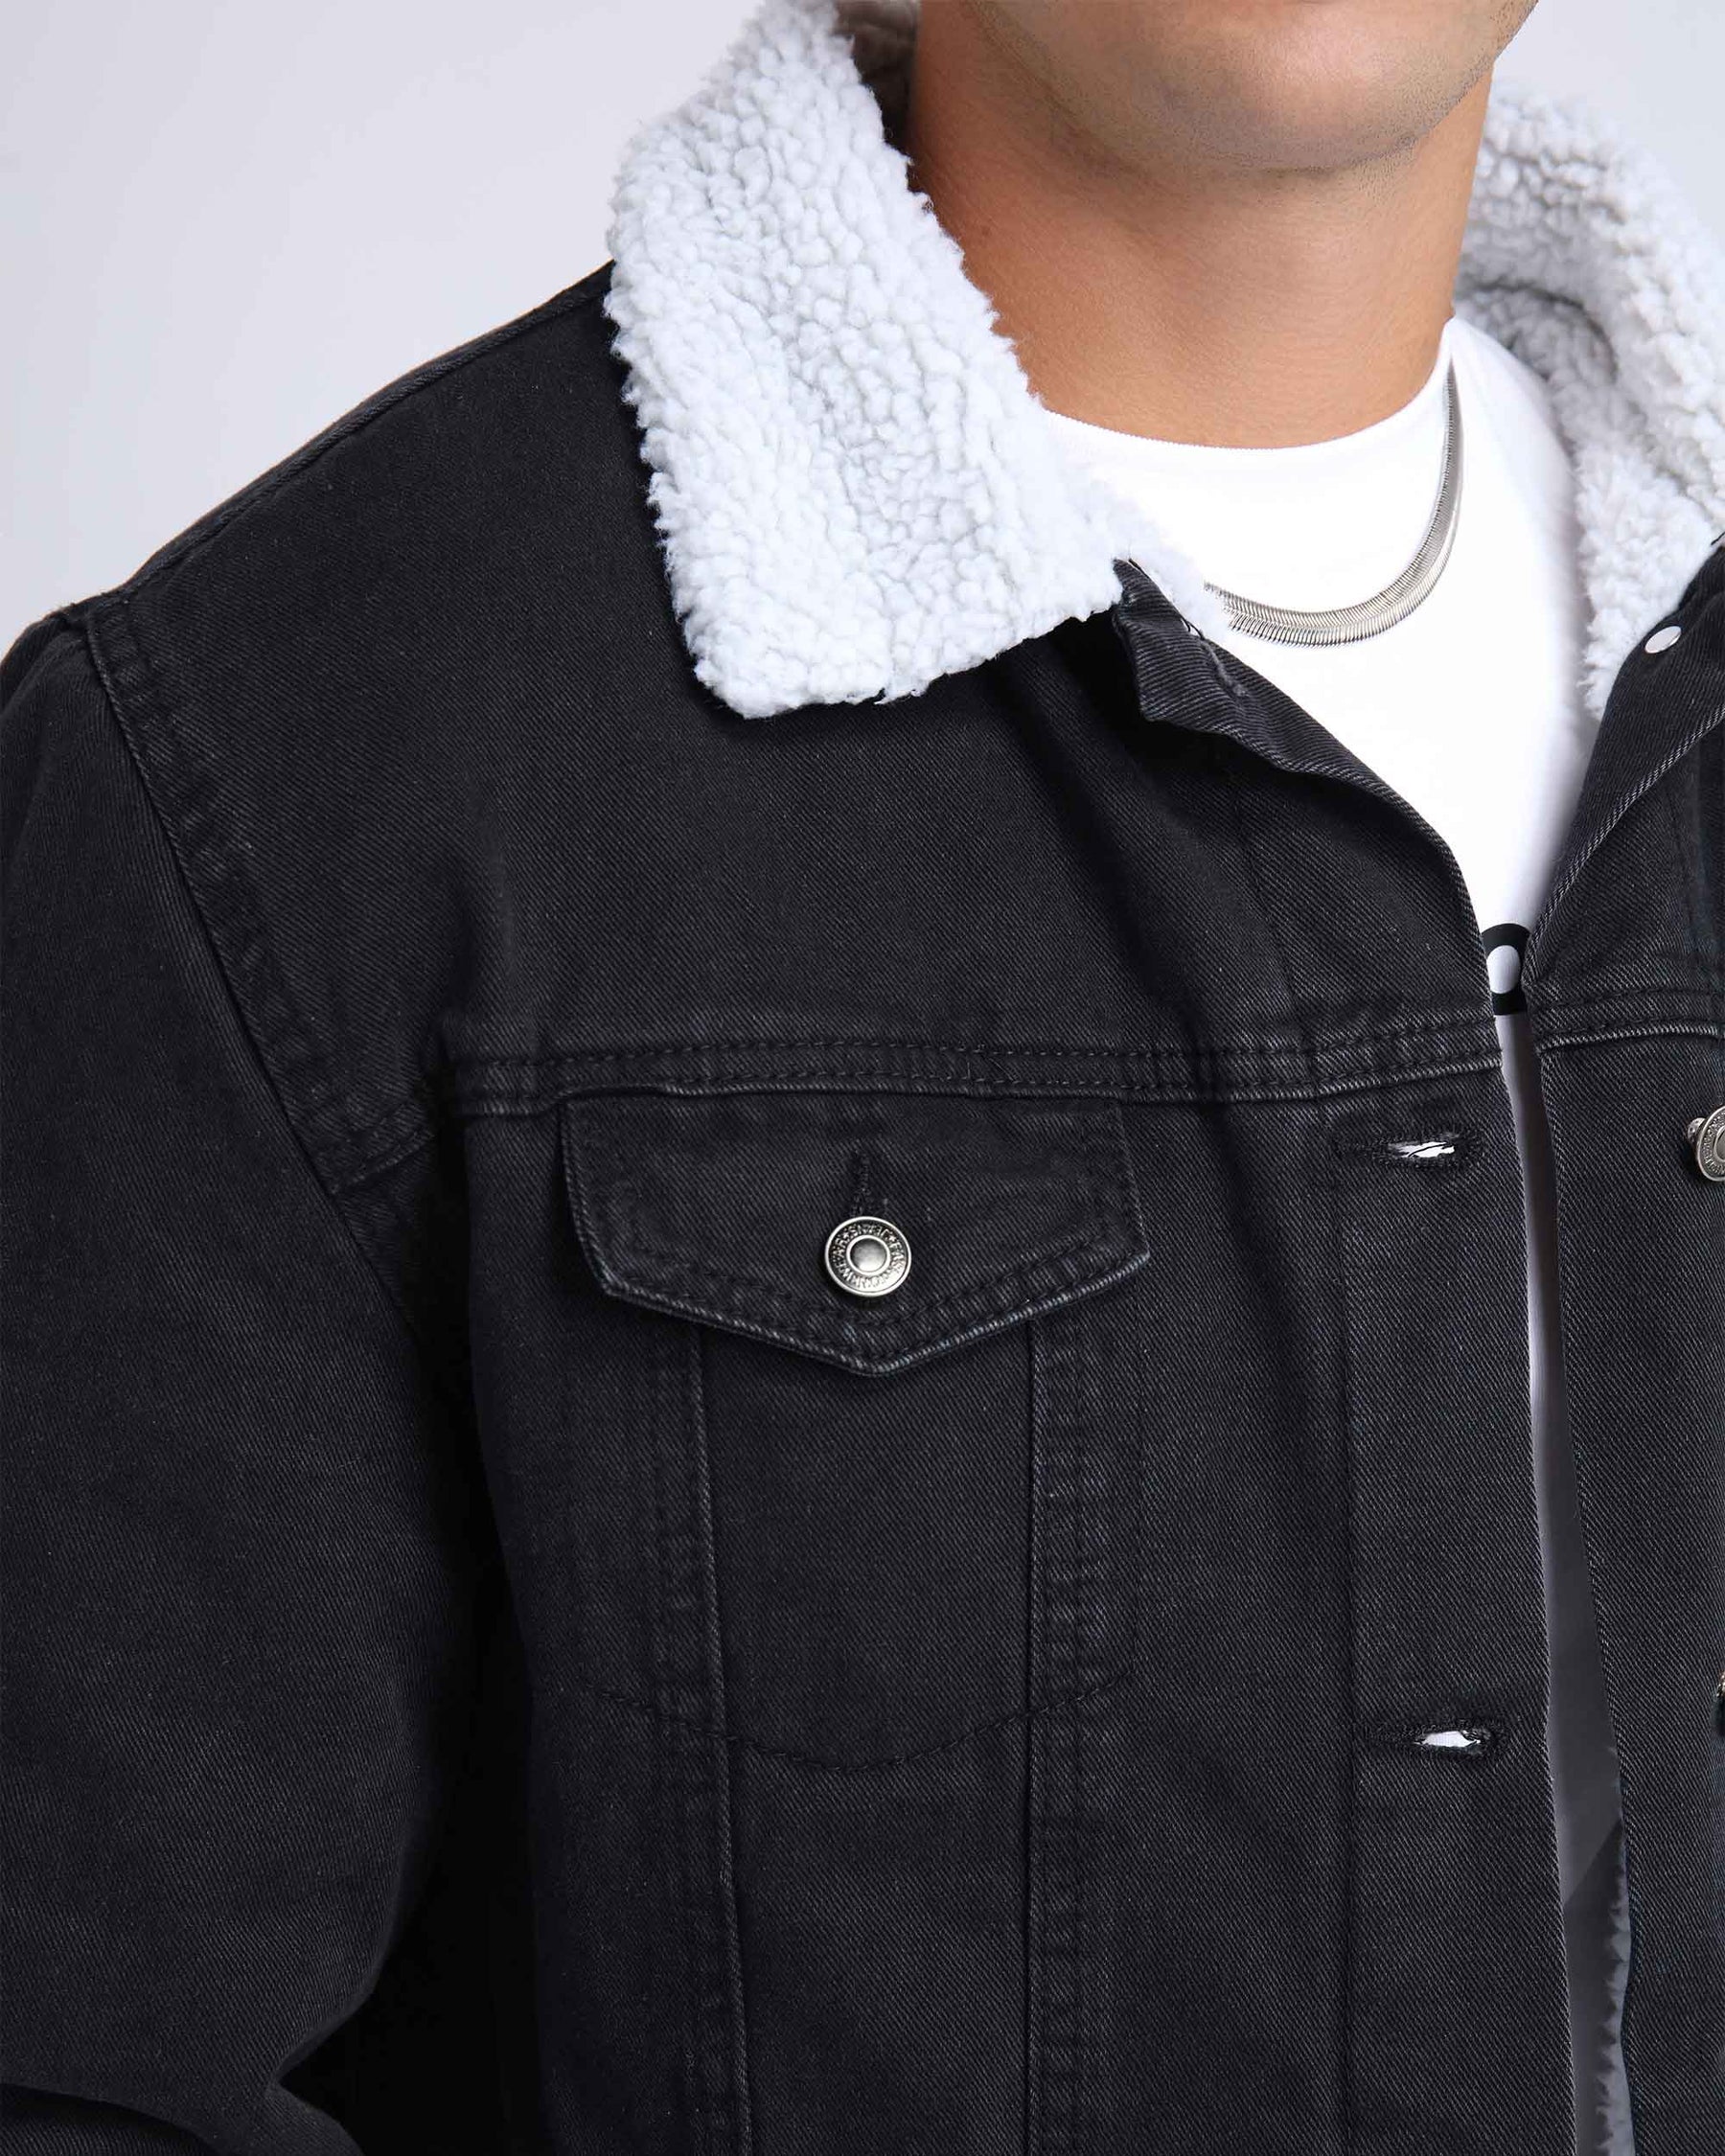 LOGEQI Denim Jackets-Chile Local Delivery